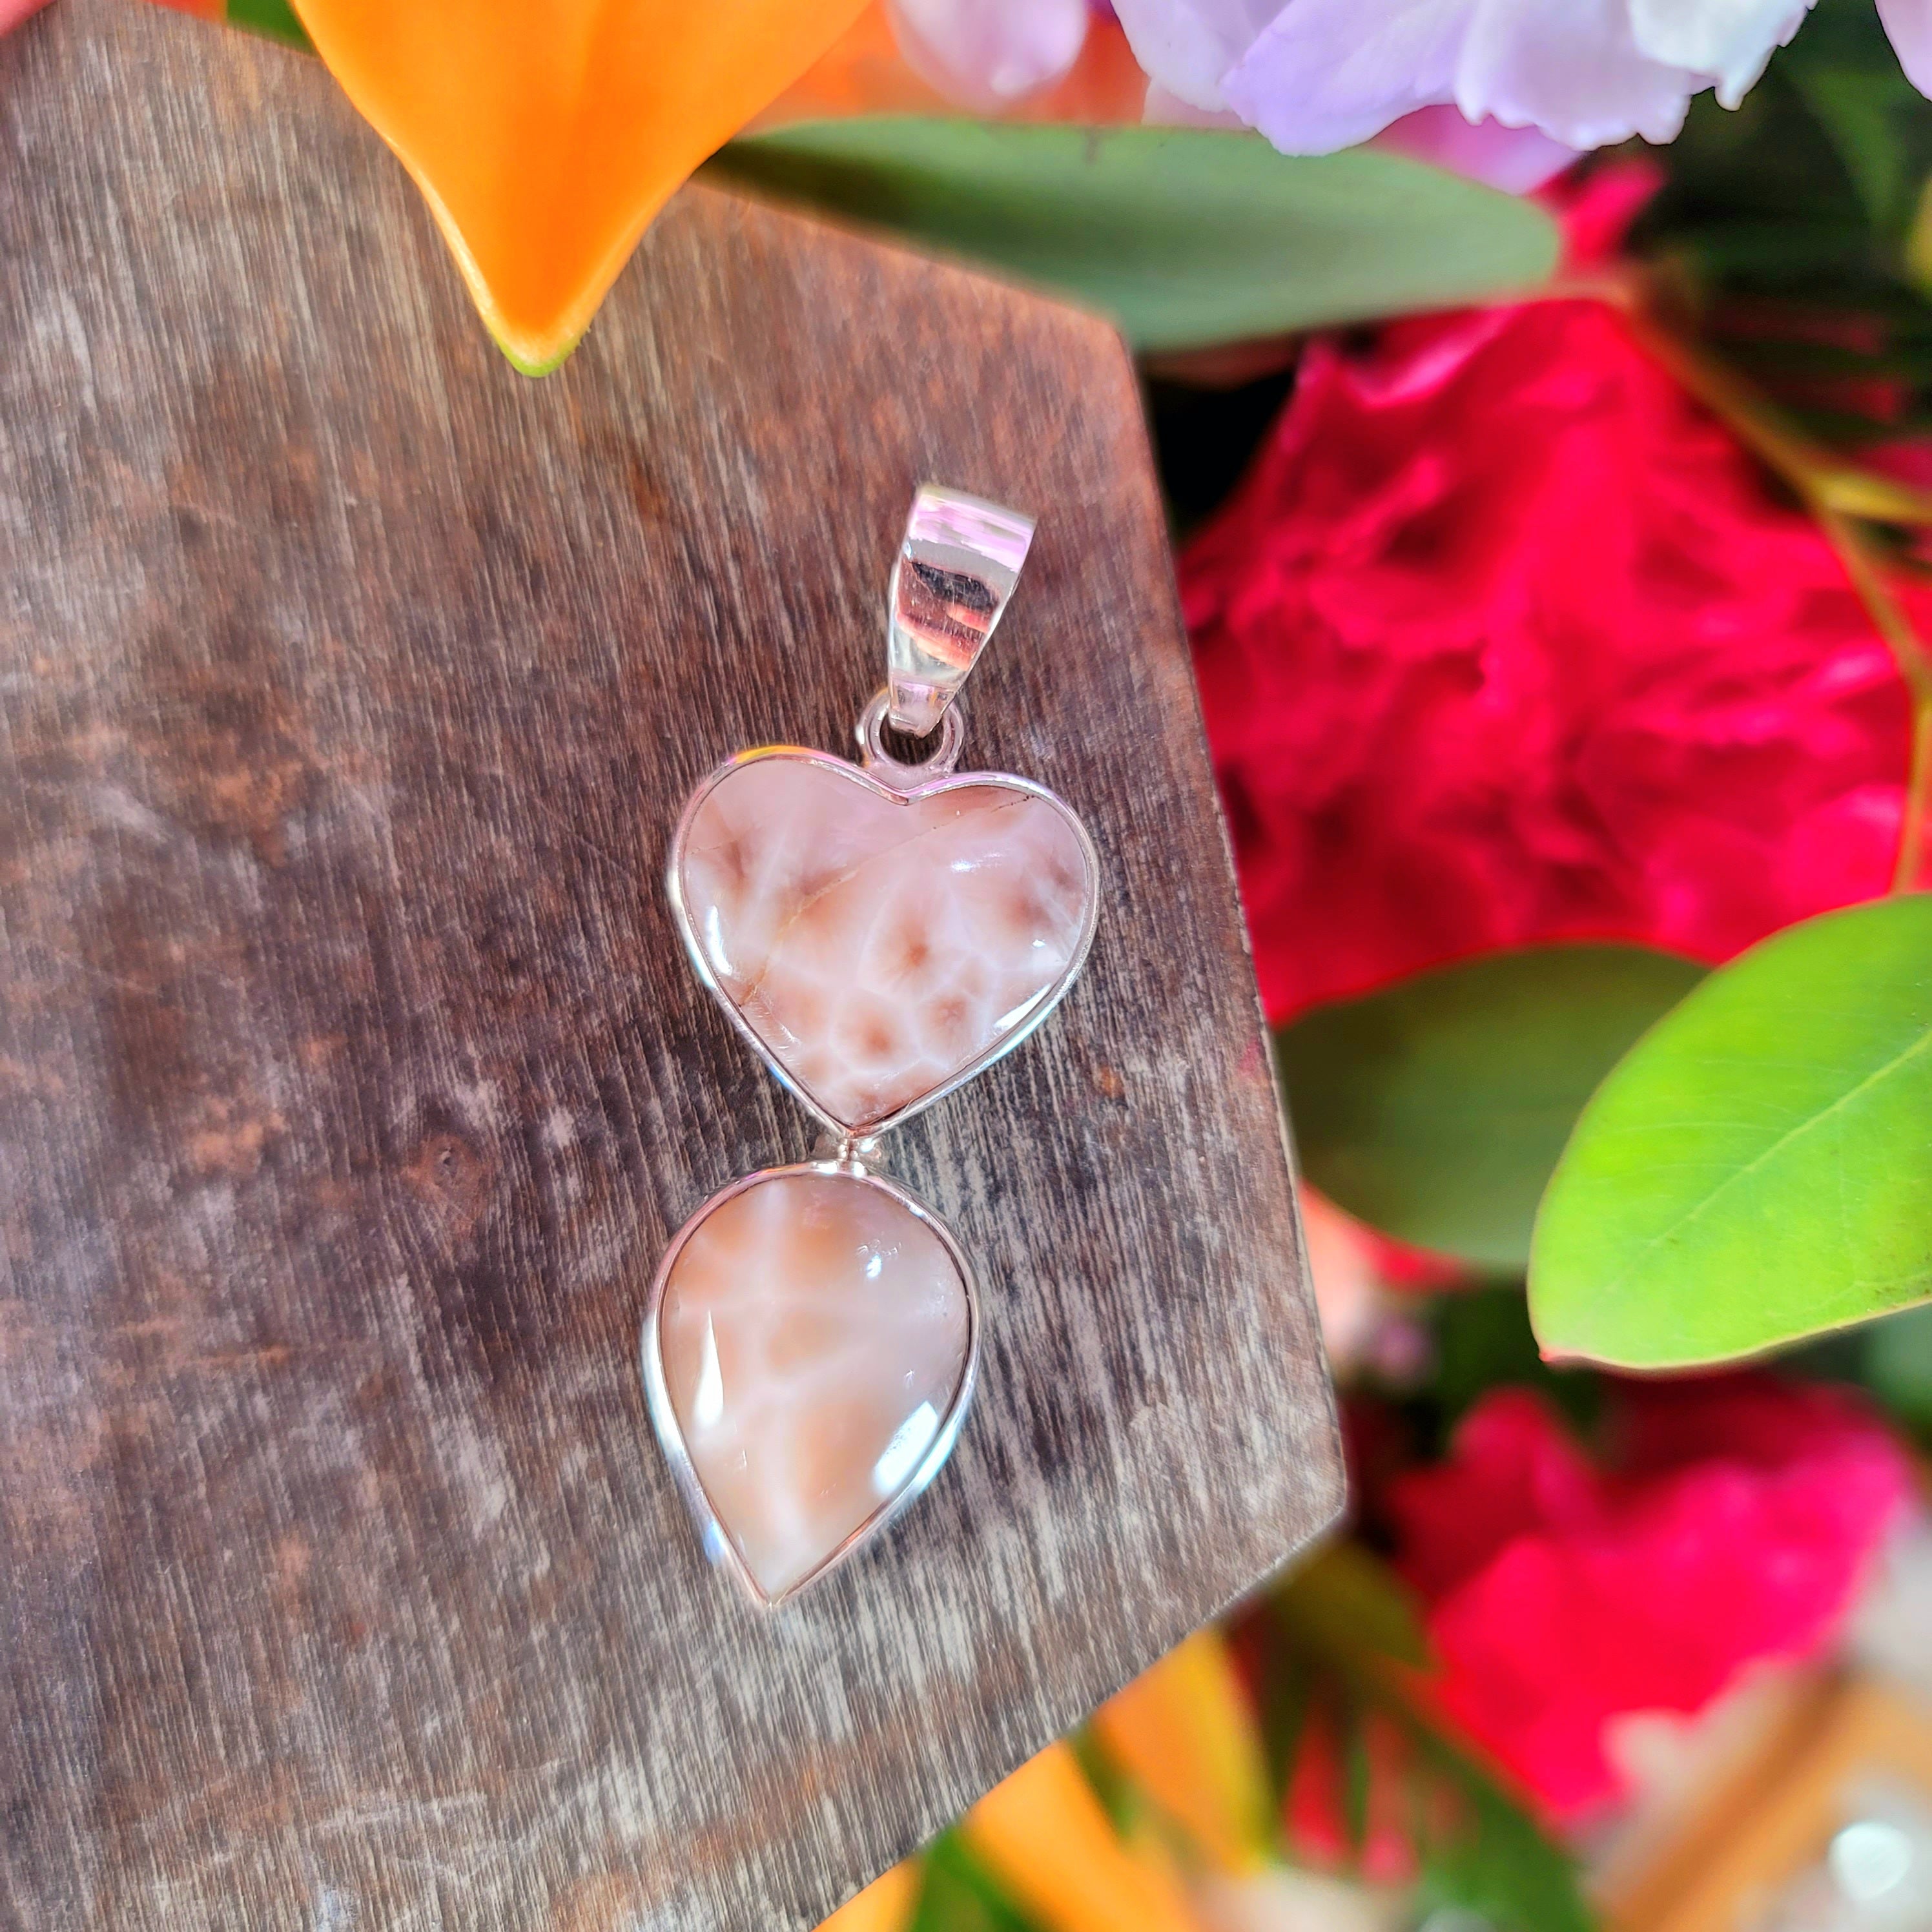 Pink Natrolite Heart Pendant .925 Silver for Channeling, Psychic Abilities and Awakening of your Third Eye Chakra